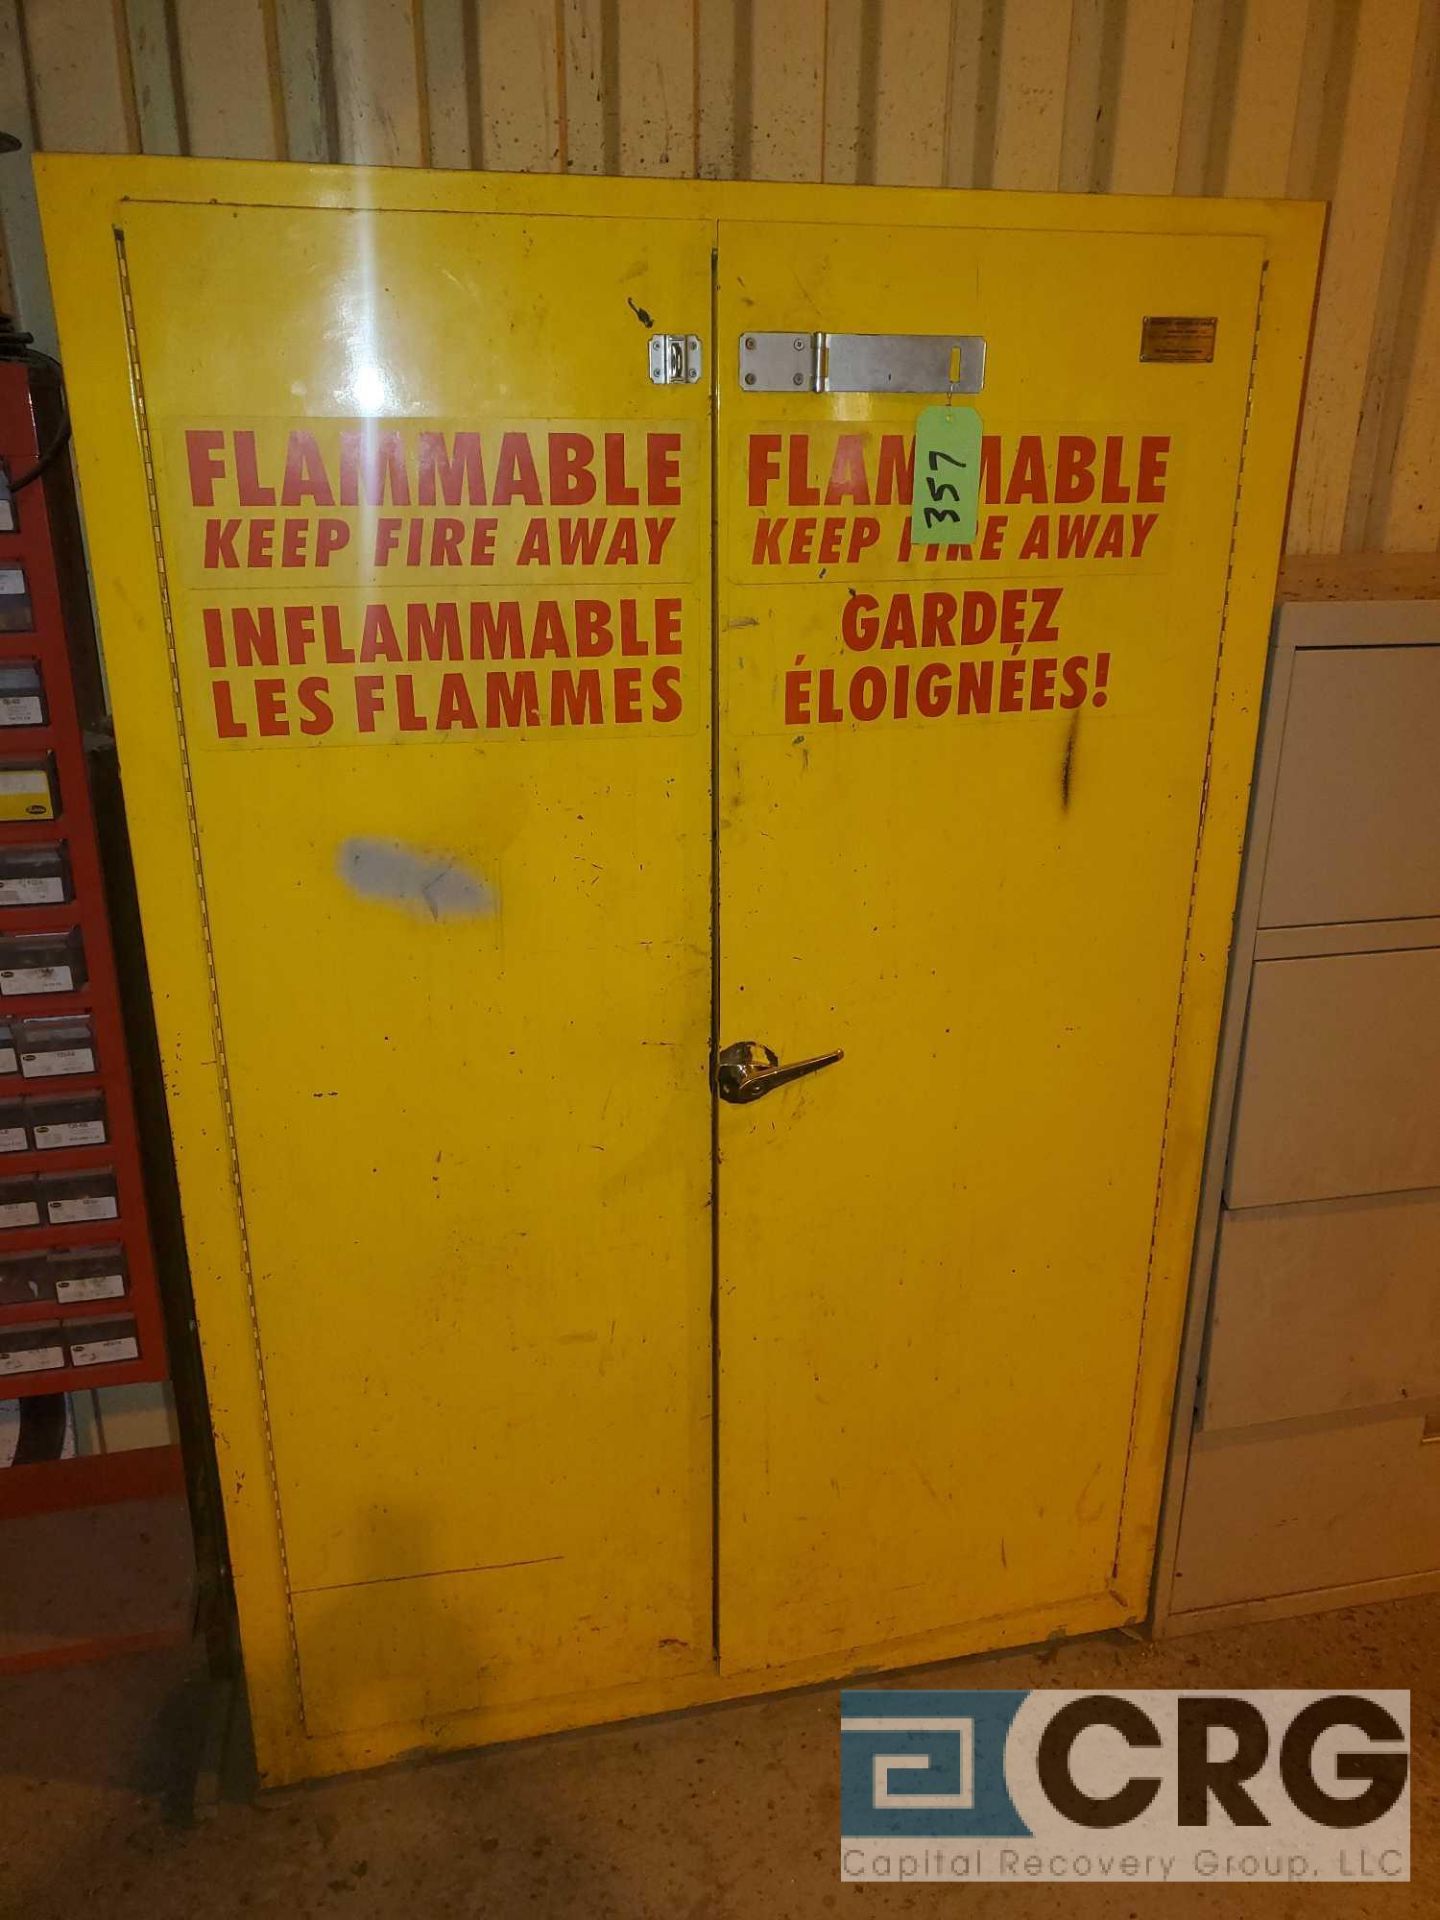 Flame Proof Storage Cabinets - Image 2 of 2